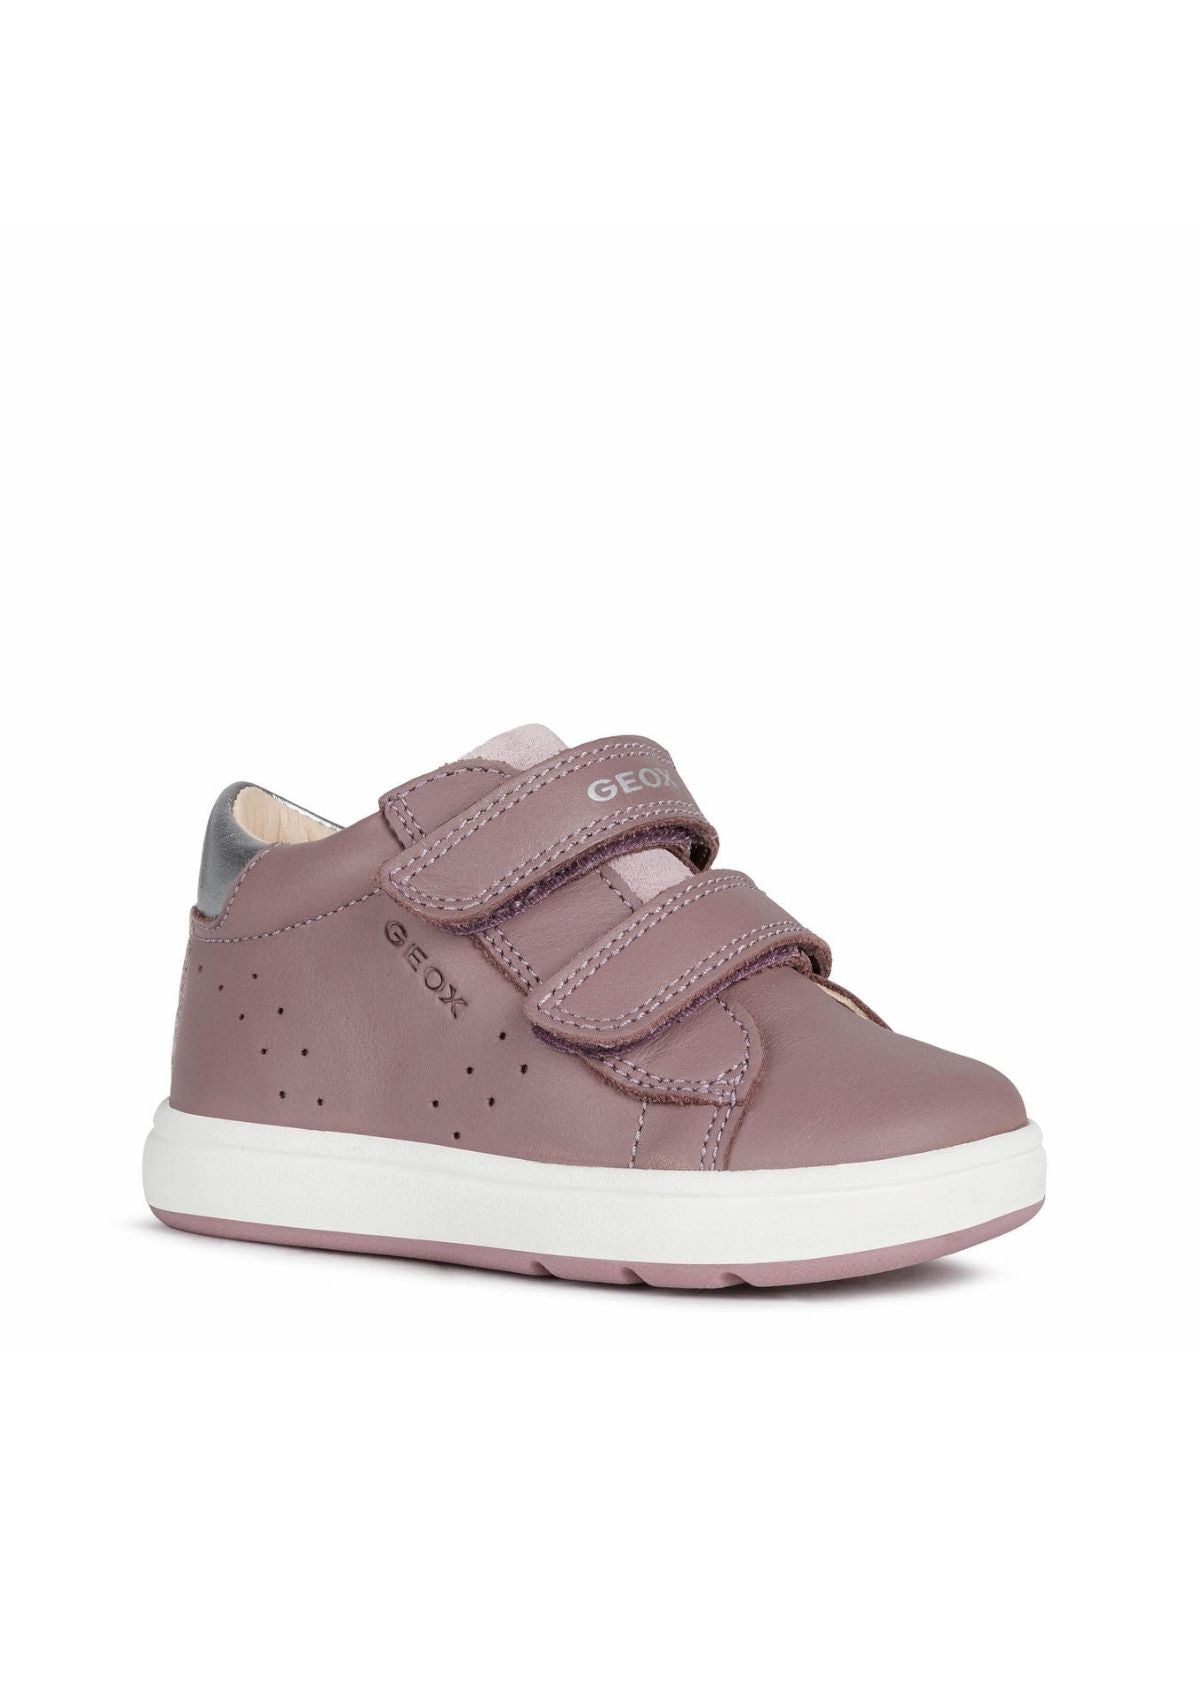 Geox Baby Girls Trainers SHAAX Silver